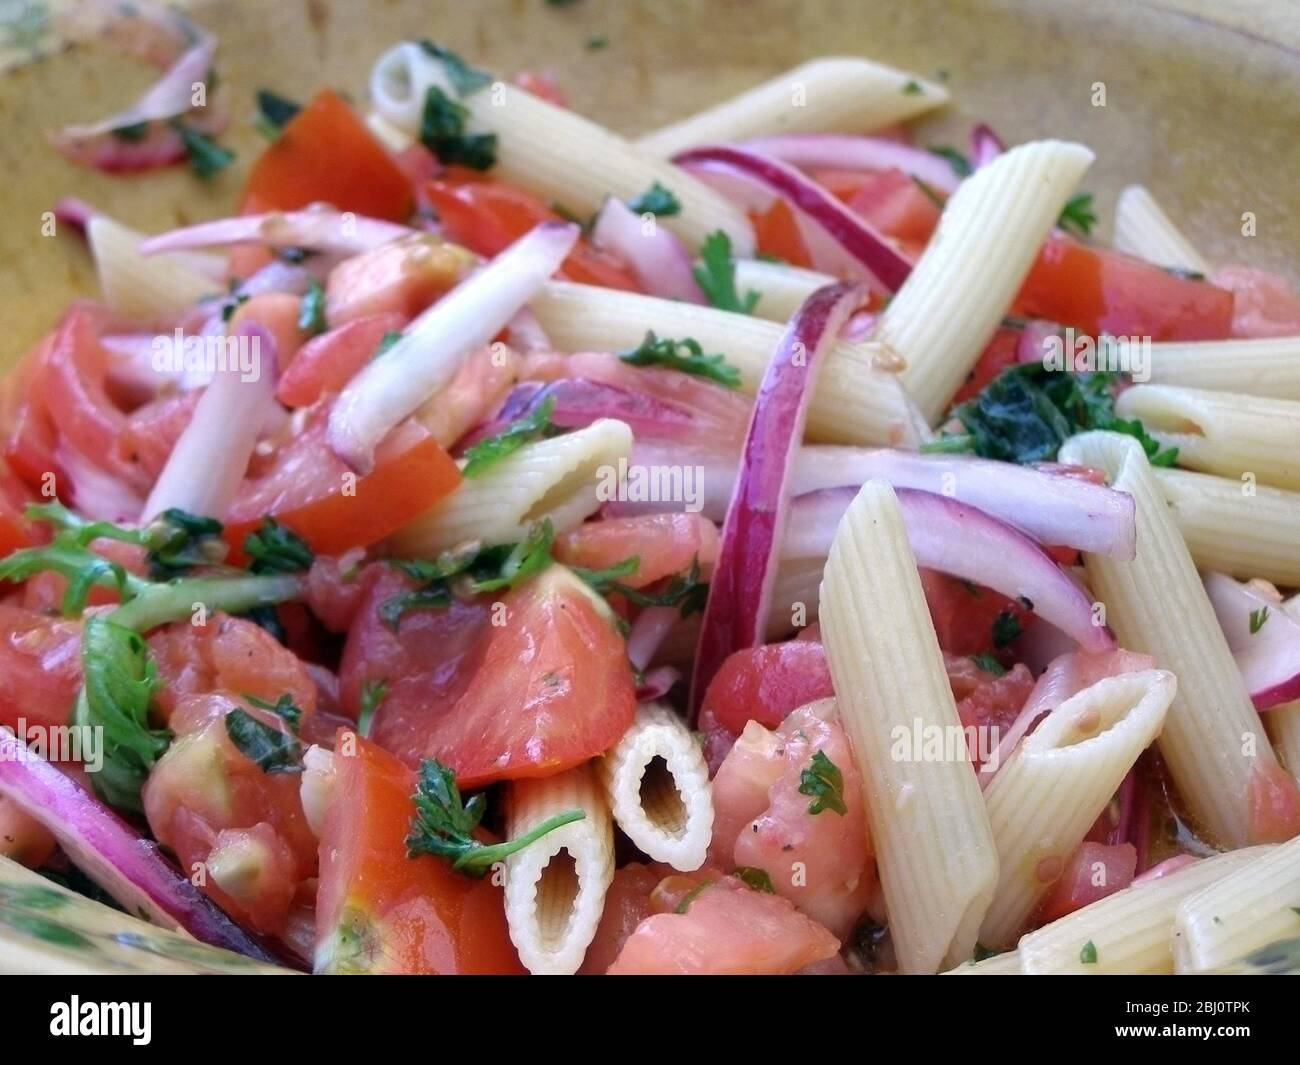 Salad of tomato wedges, red onions, pasta shapes, parsley, with red wine vinegar and olive oil dressing - Stock Photo